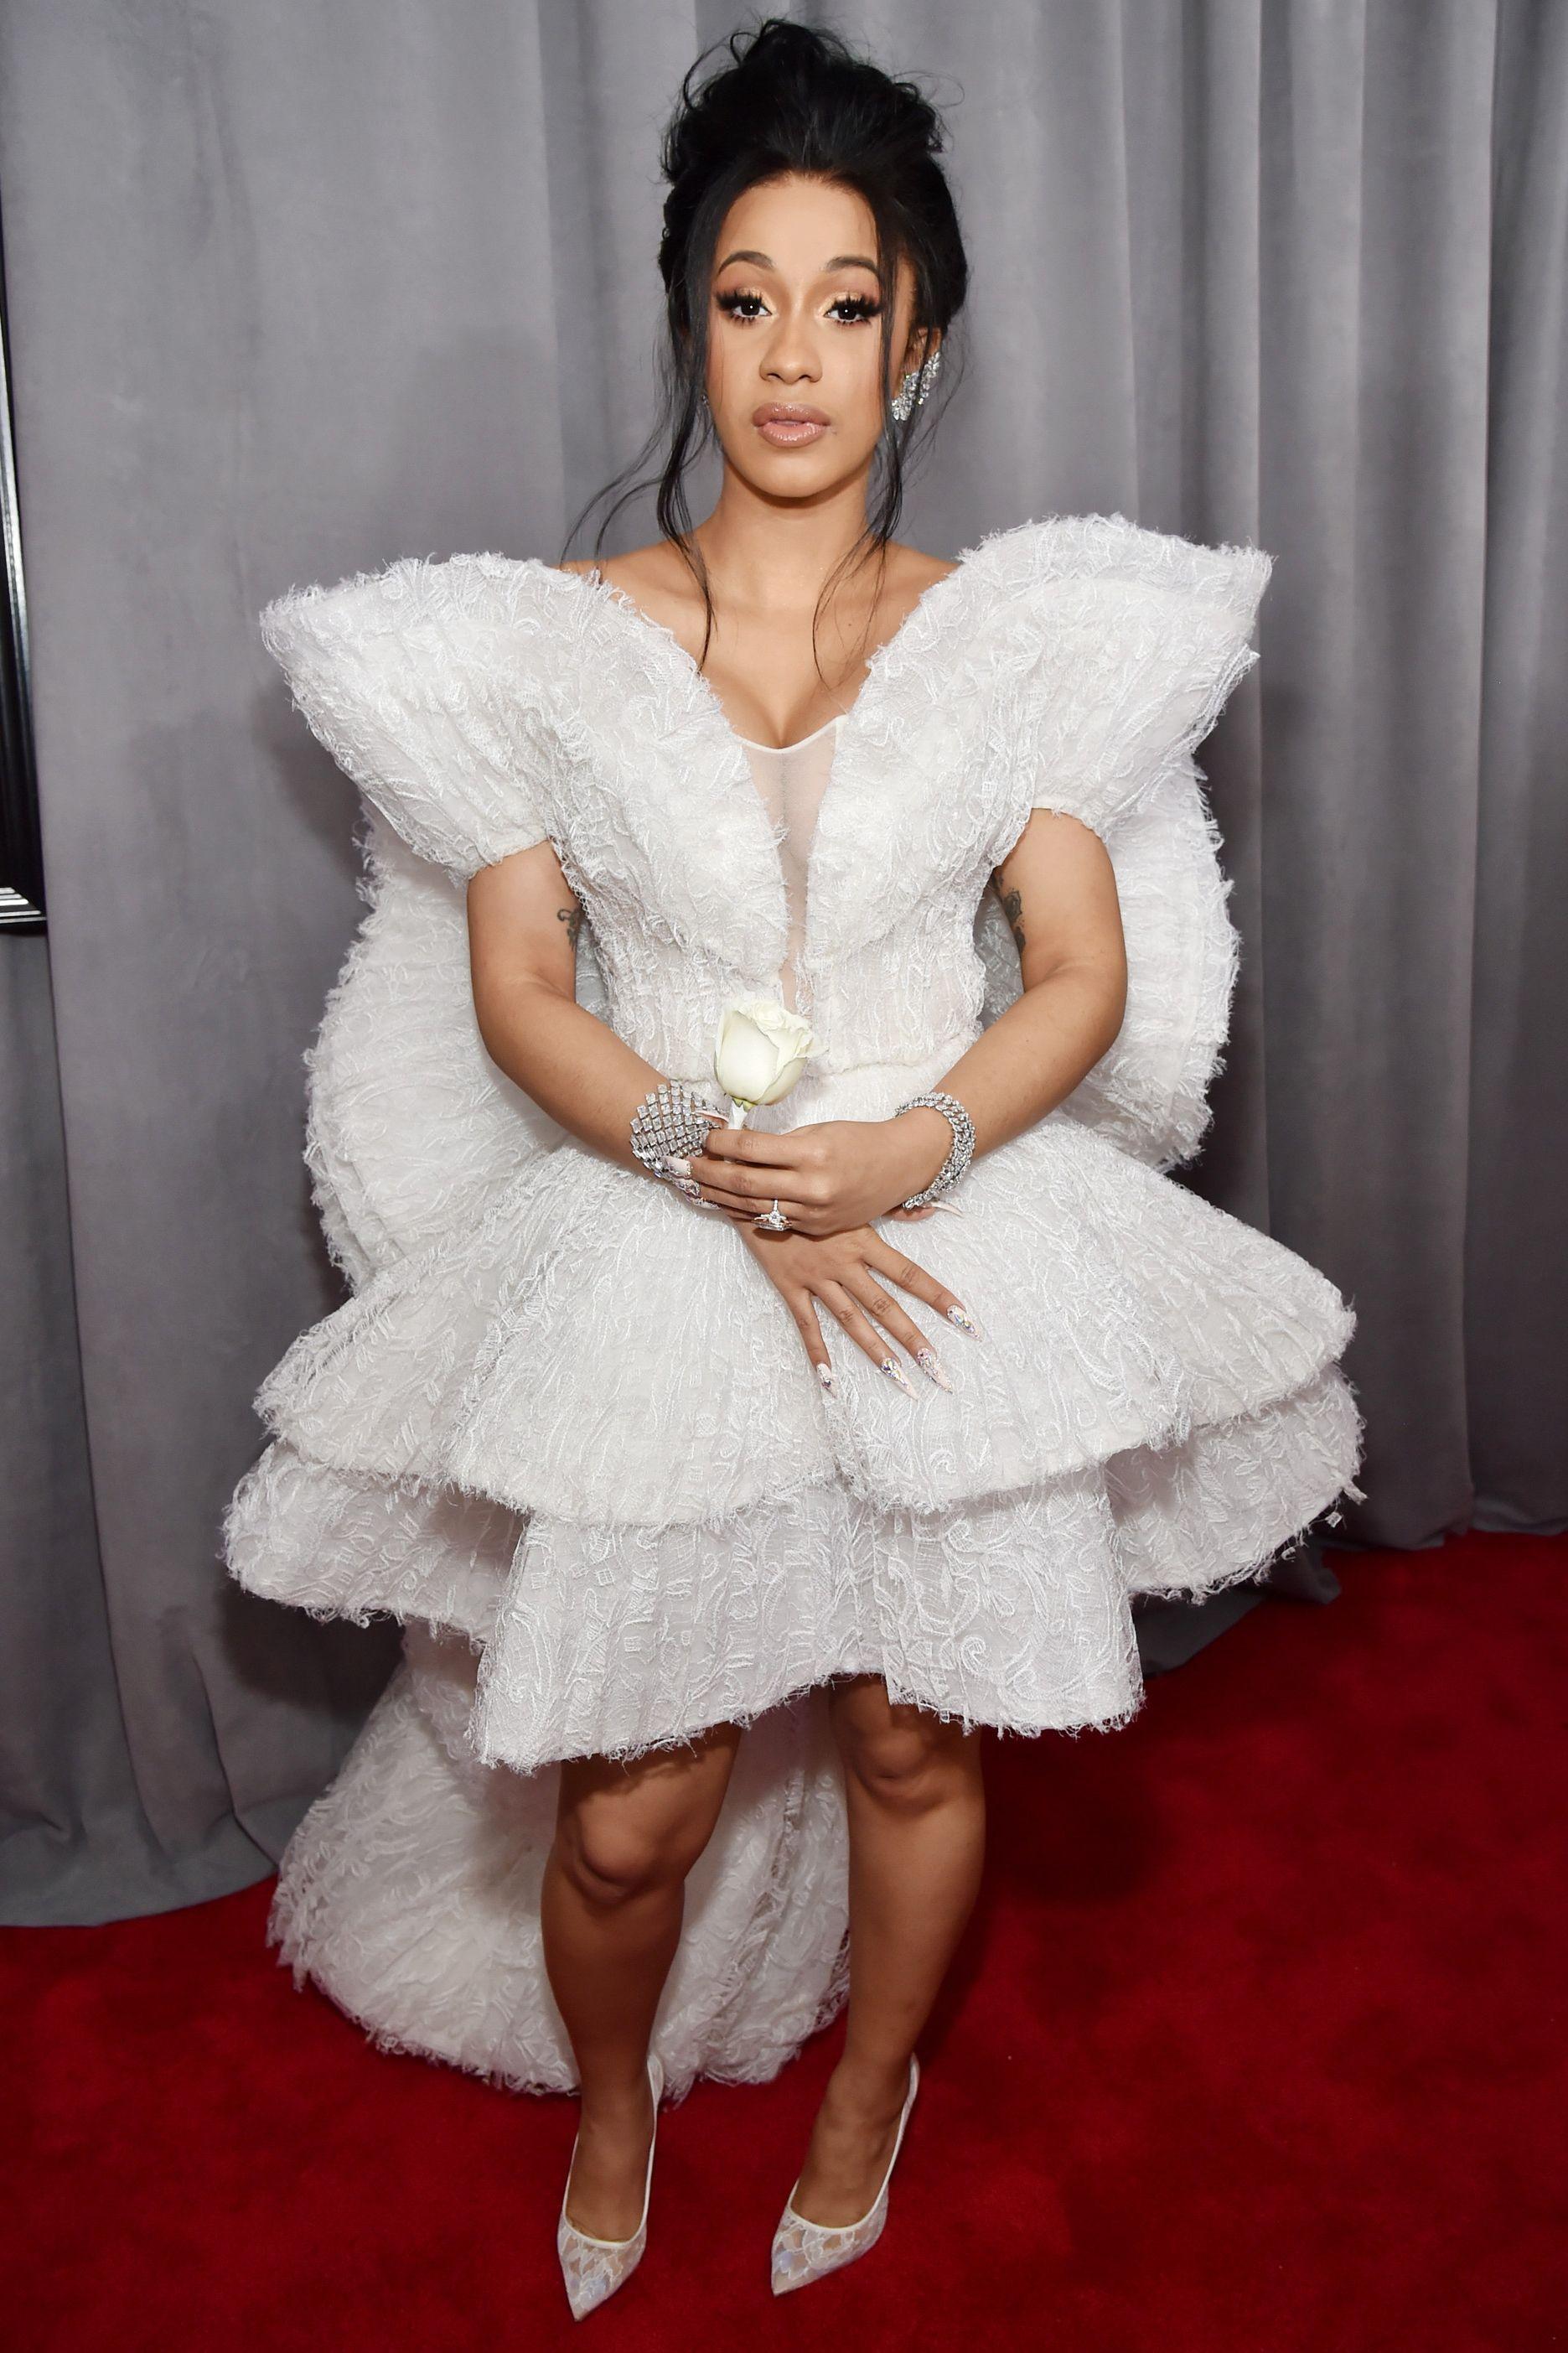 Grammys 2018: Cardi B's Angelic All White Look Is So Extra